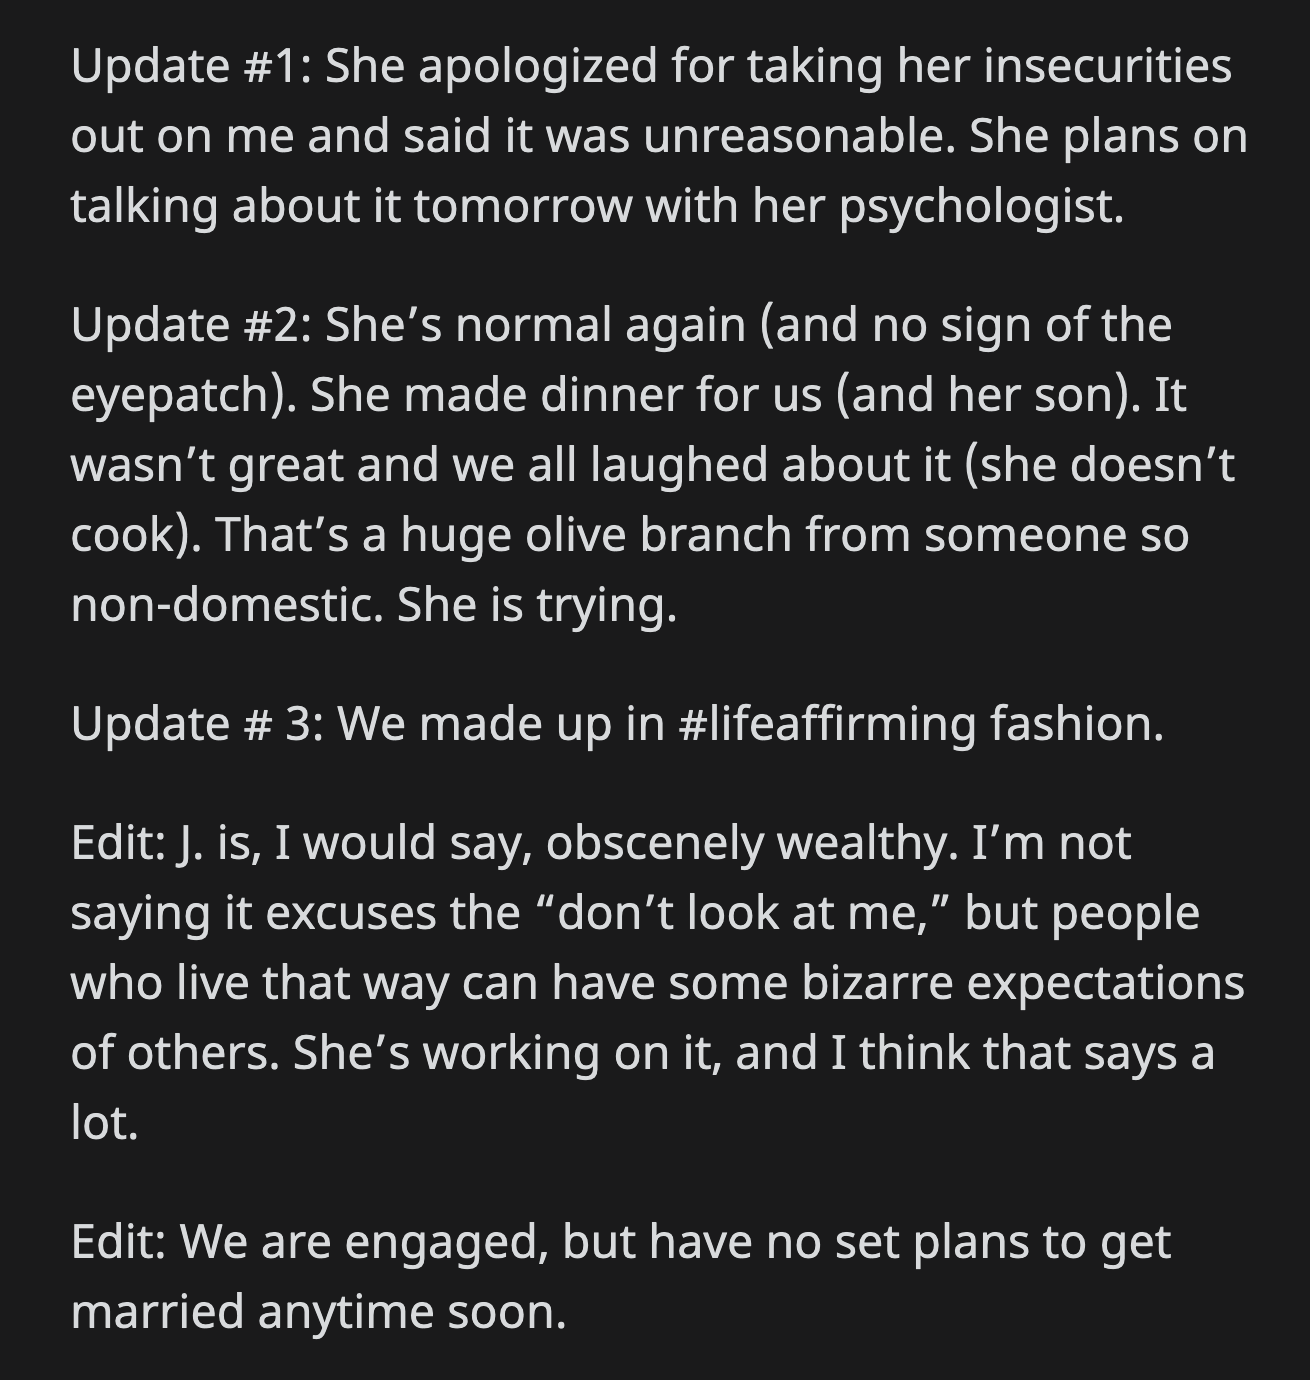 OP posted an update. She and J made up. J apologized to OP by making them dinner and promising she would talk to her psychologist about what happened.